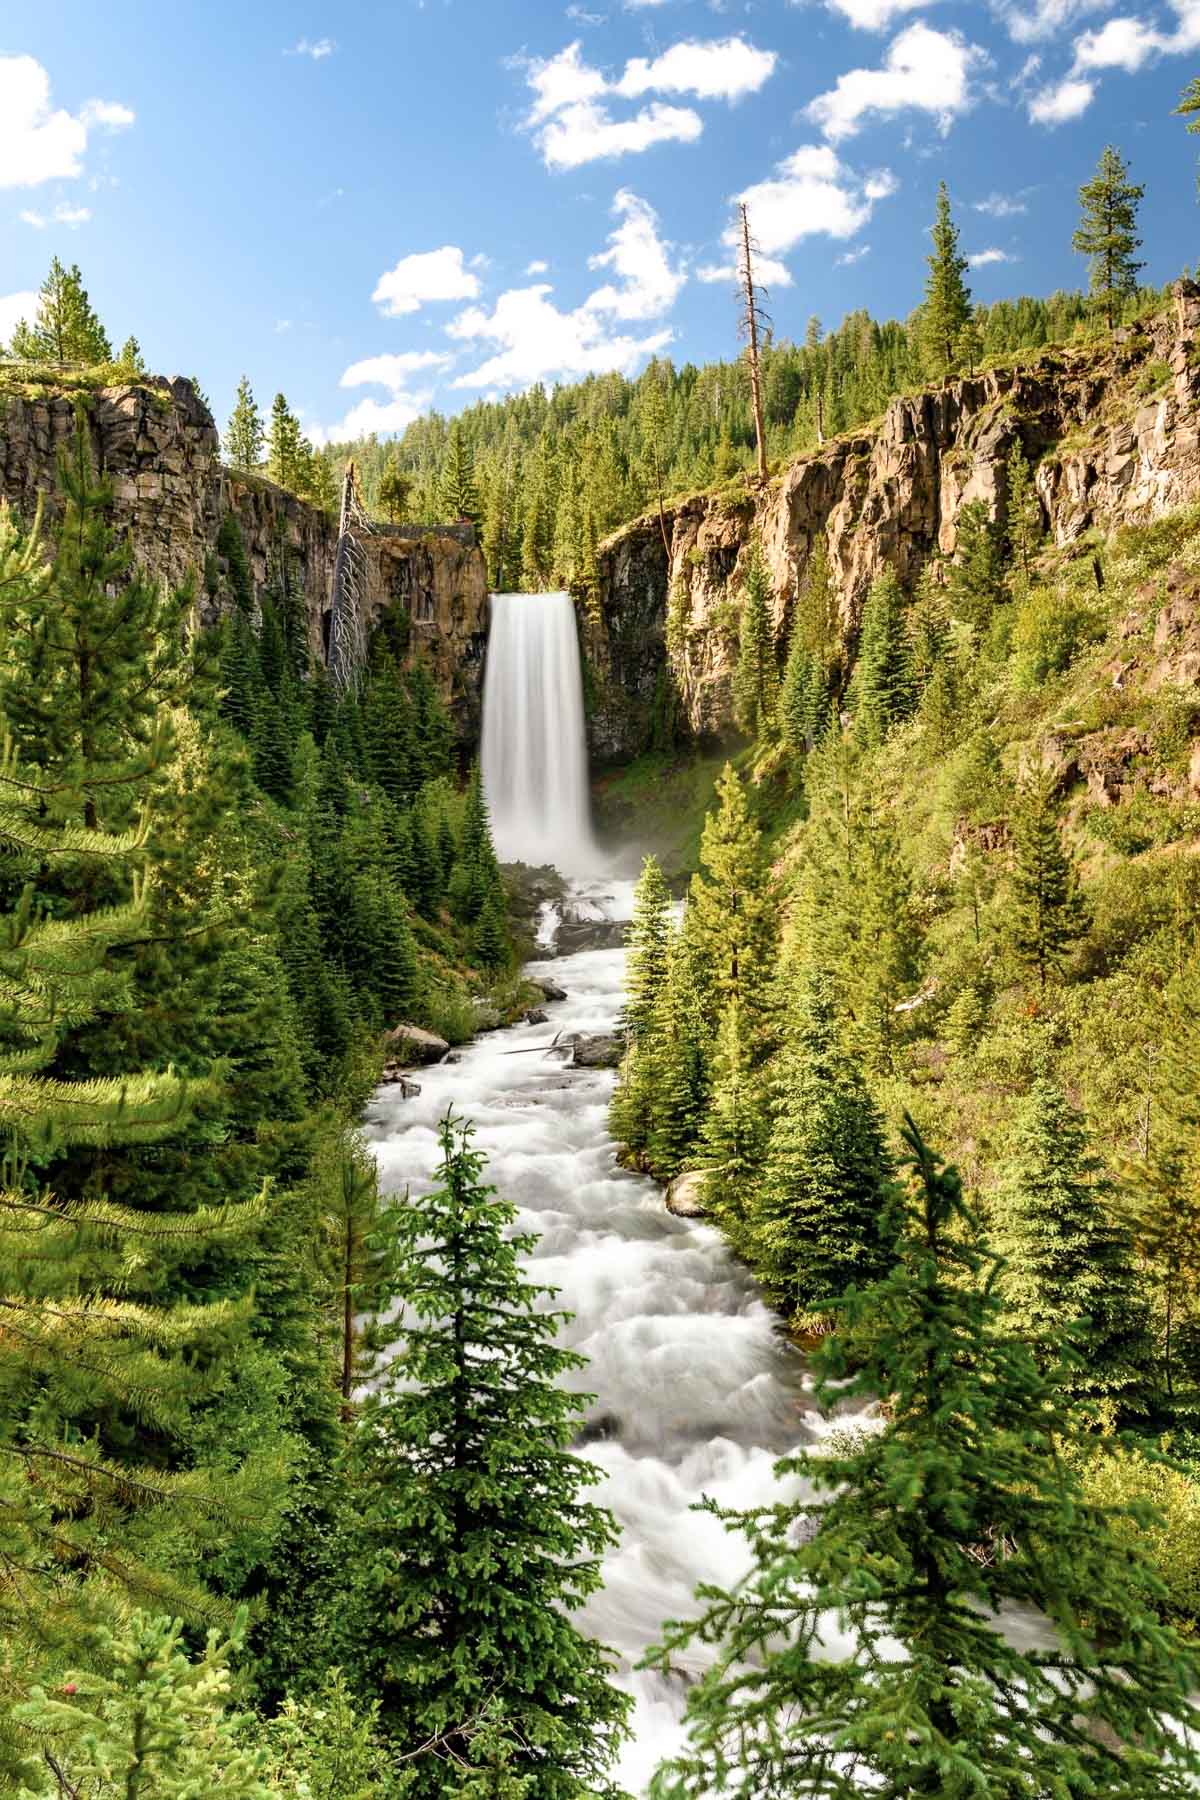 Tumalo Falls from the lower viewpoint